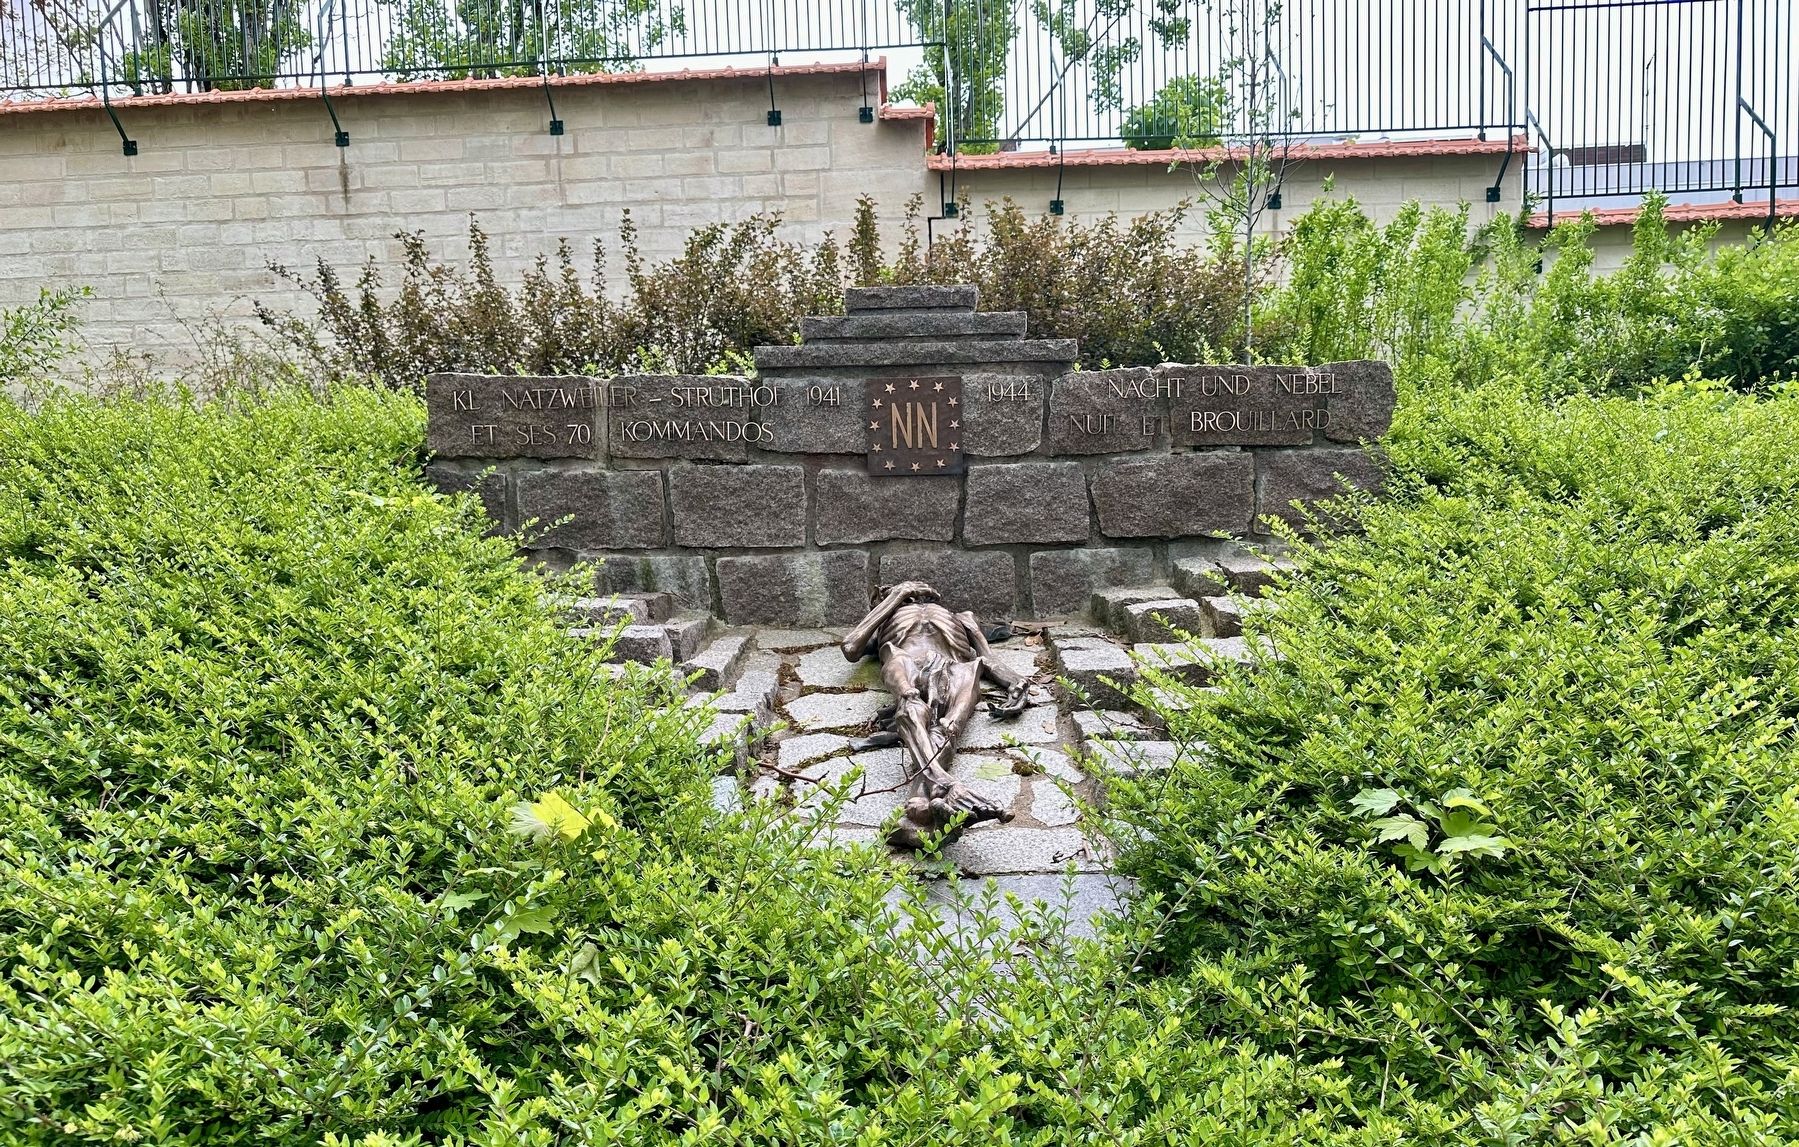 Natzweiler-Struthof Concentration Camp Memorial - wide view image, Touch for more information